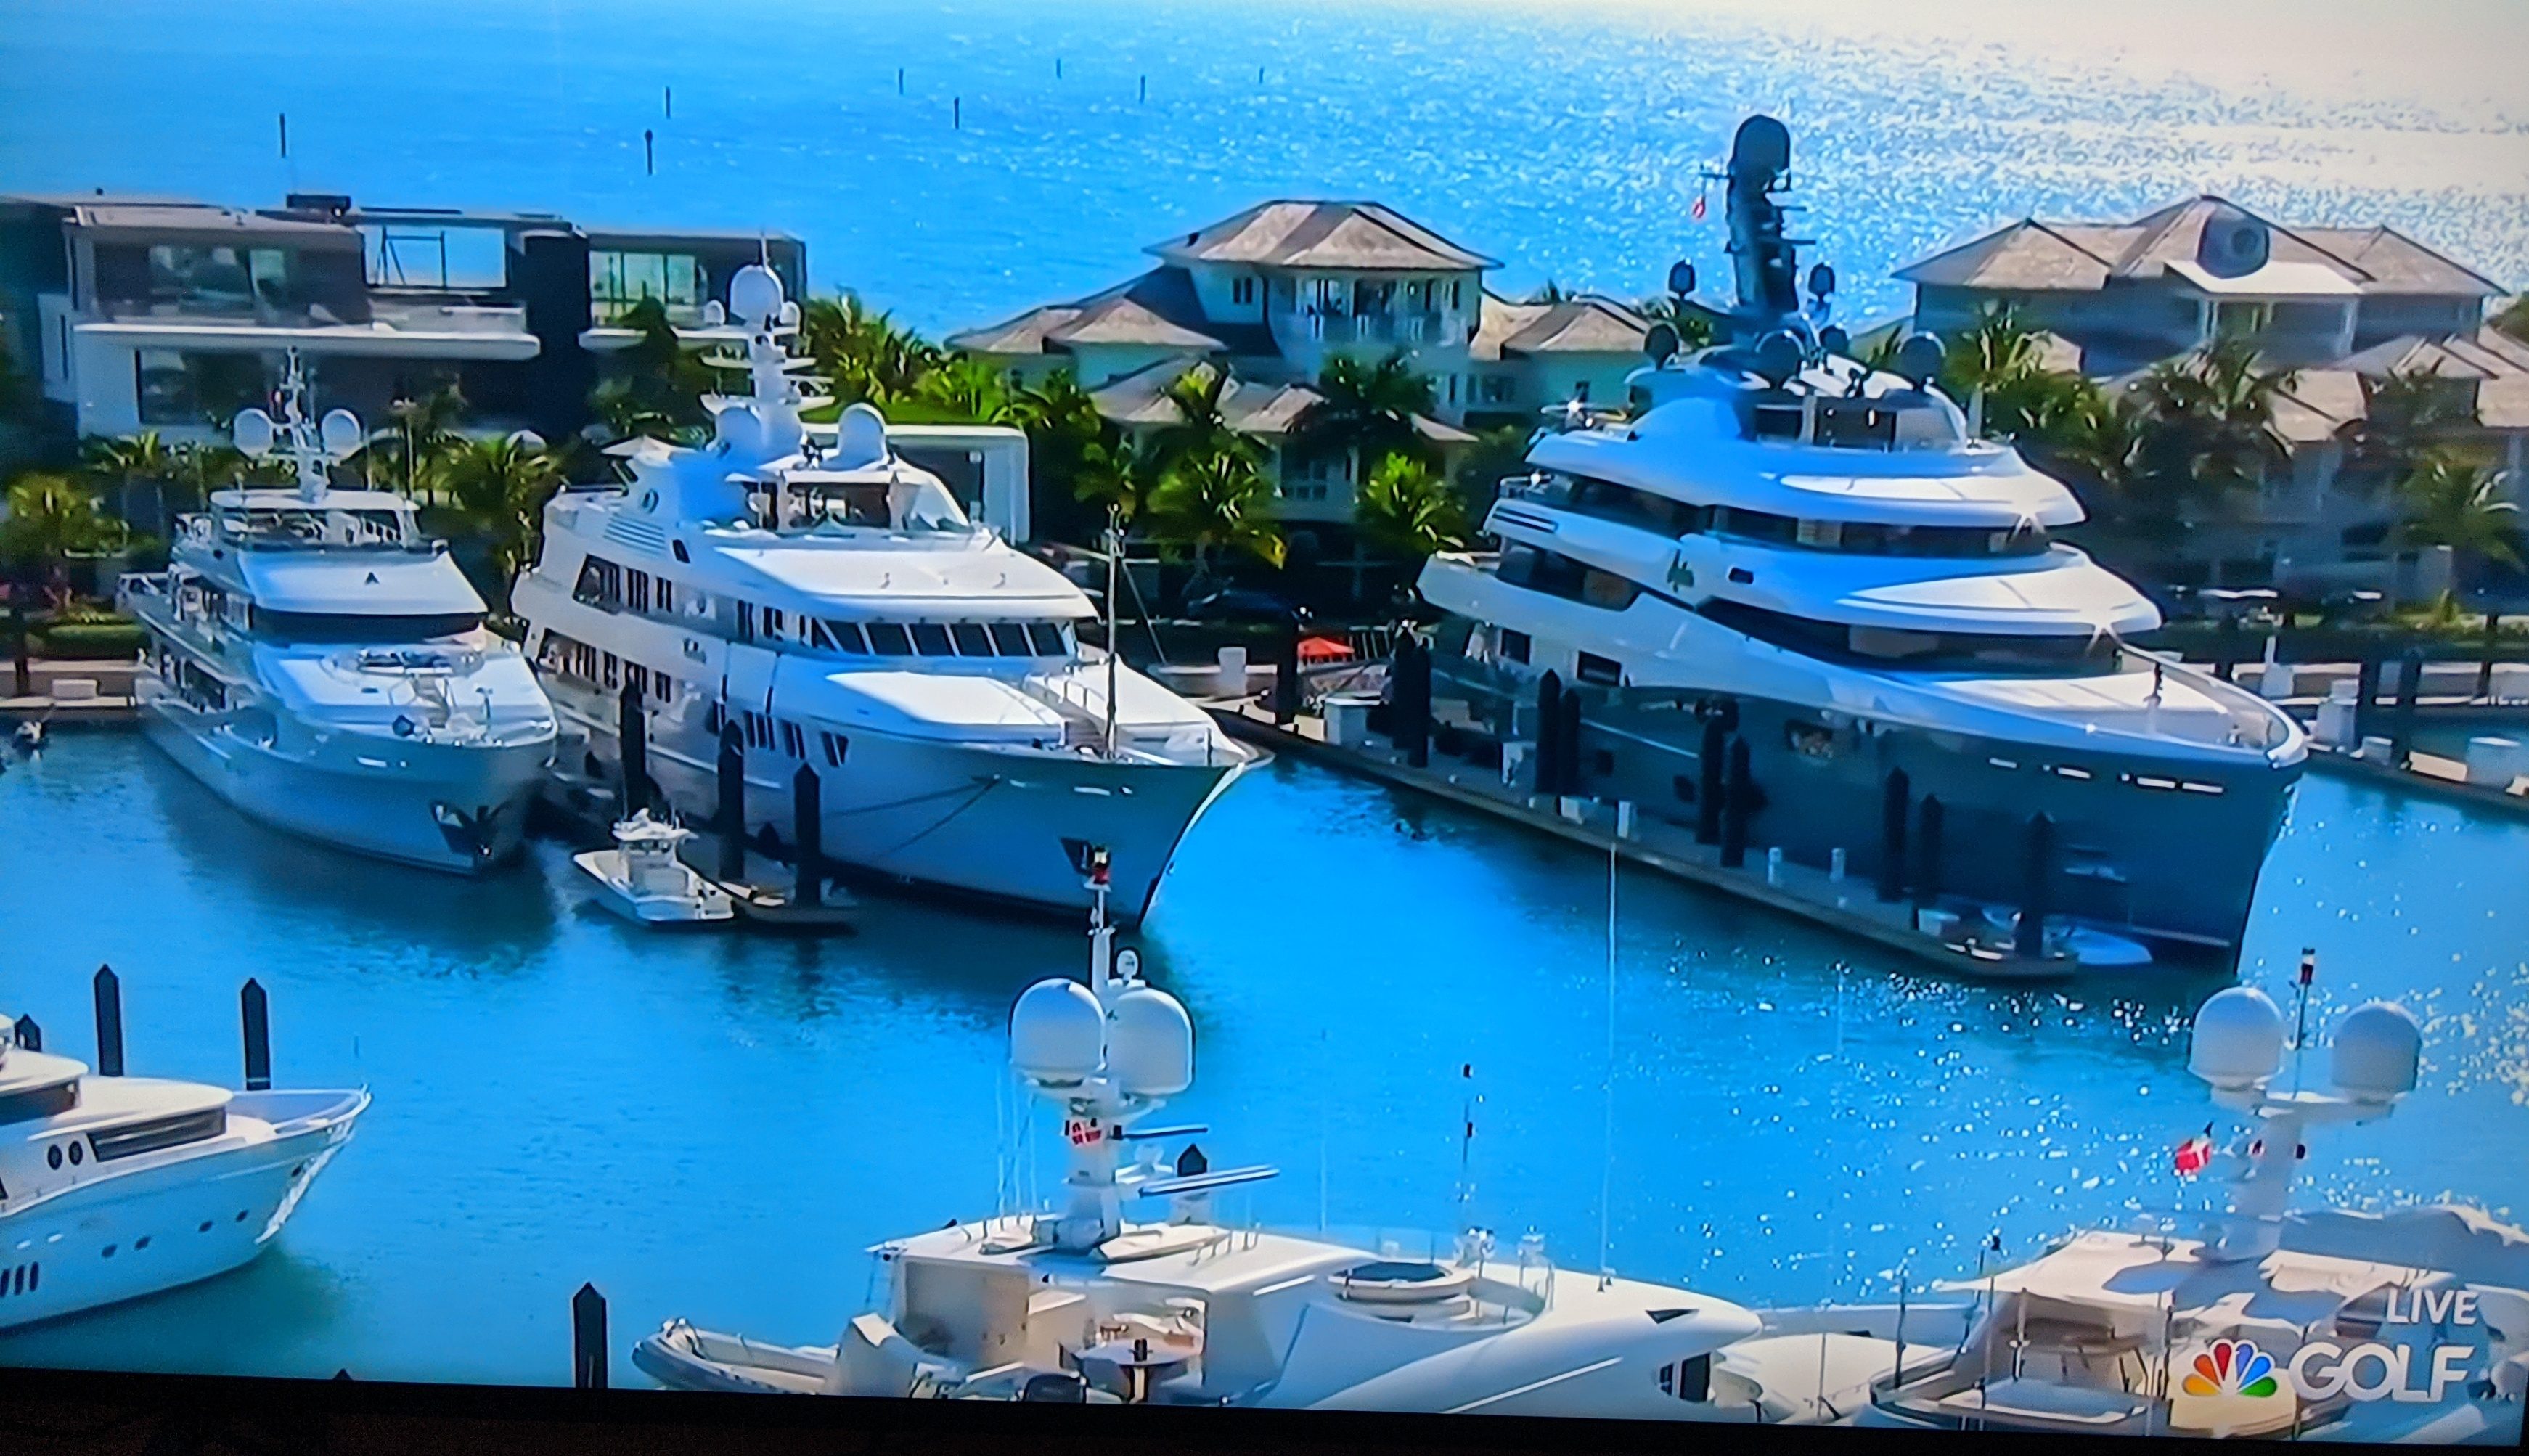 Is Tiger Woods going to need a bigger boat?